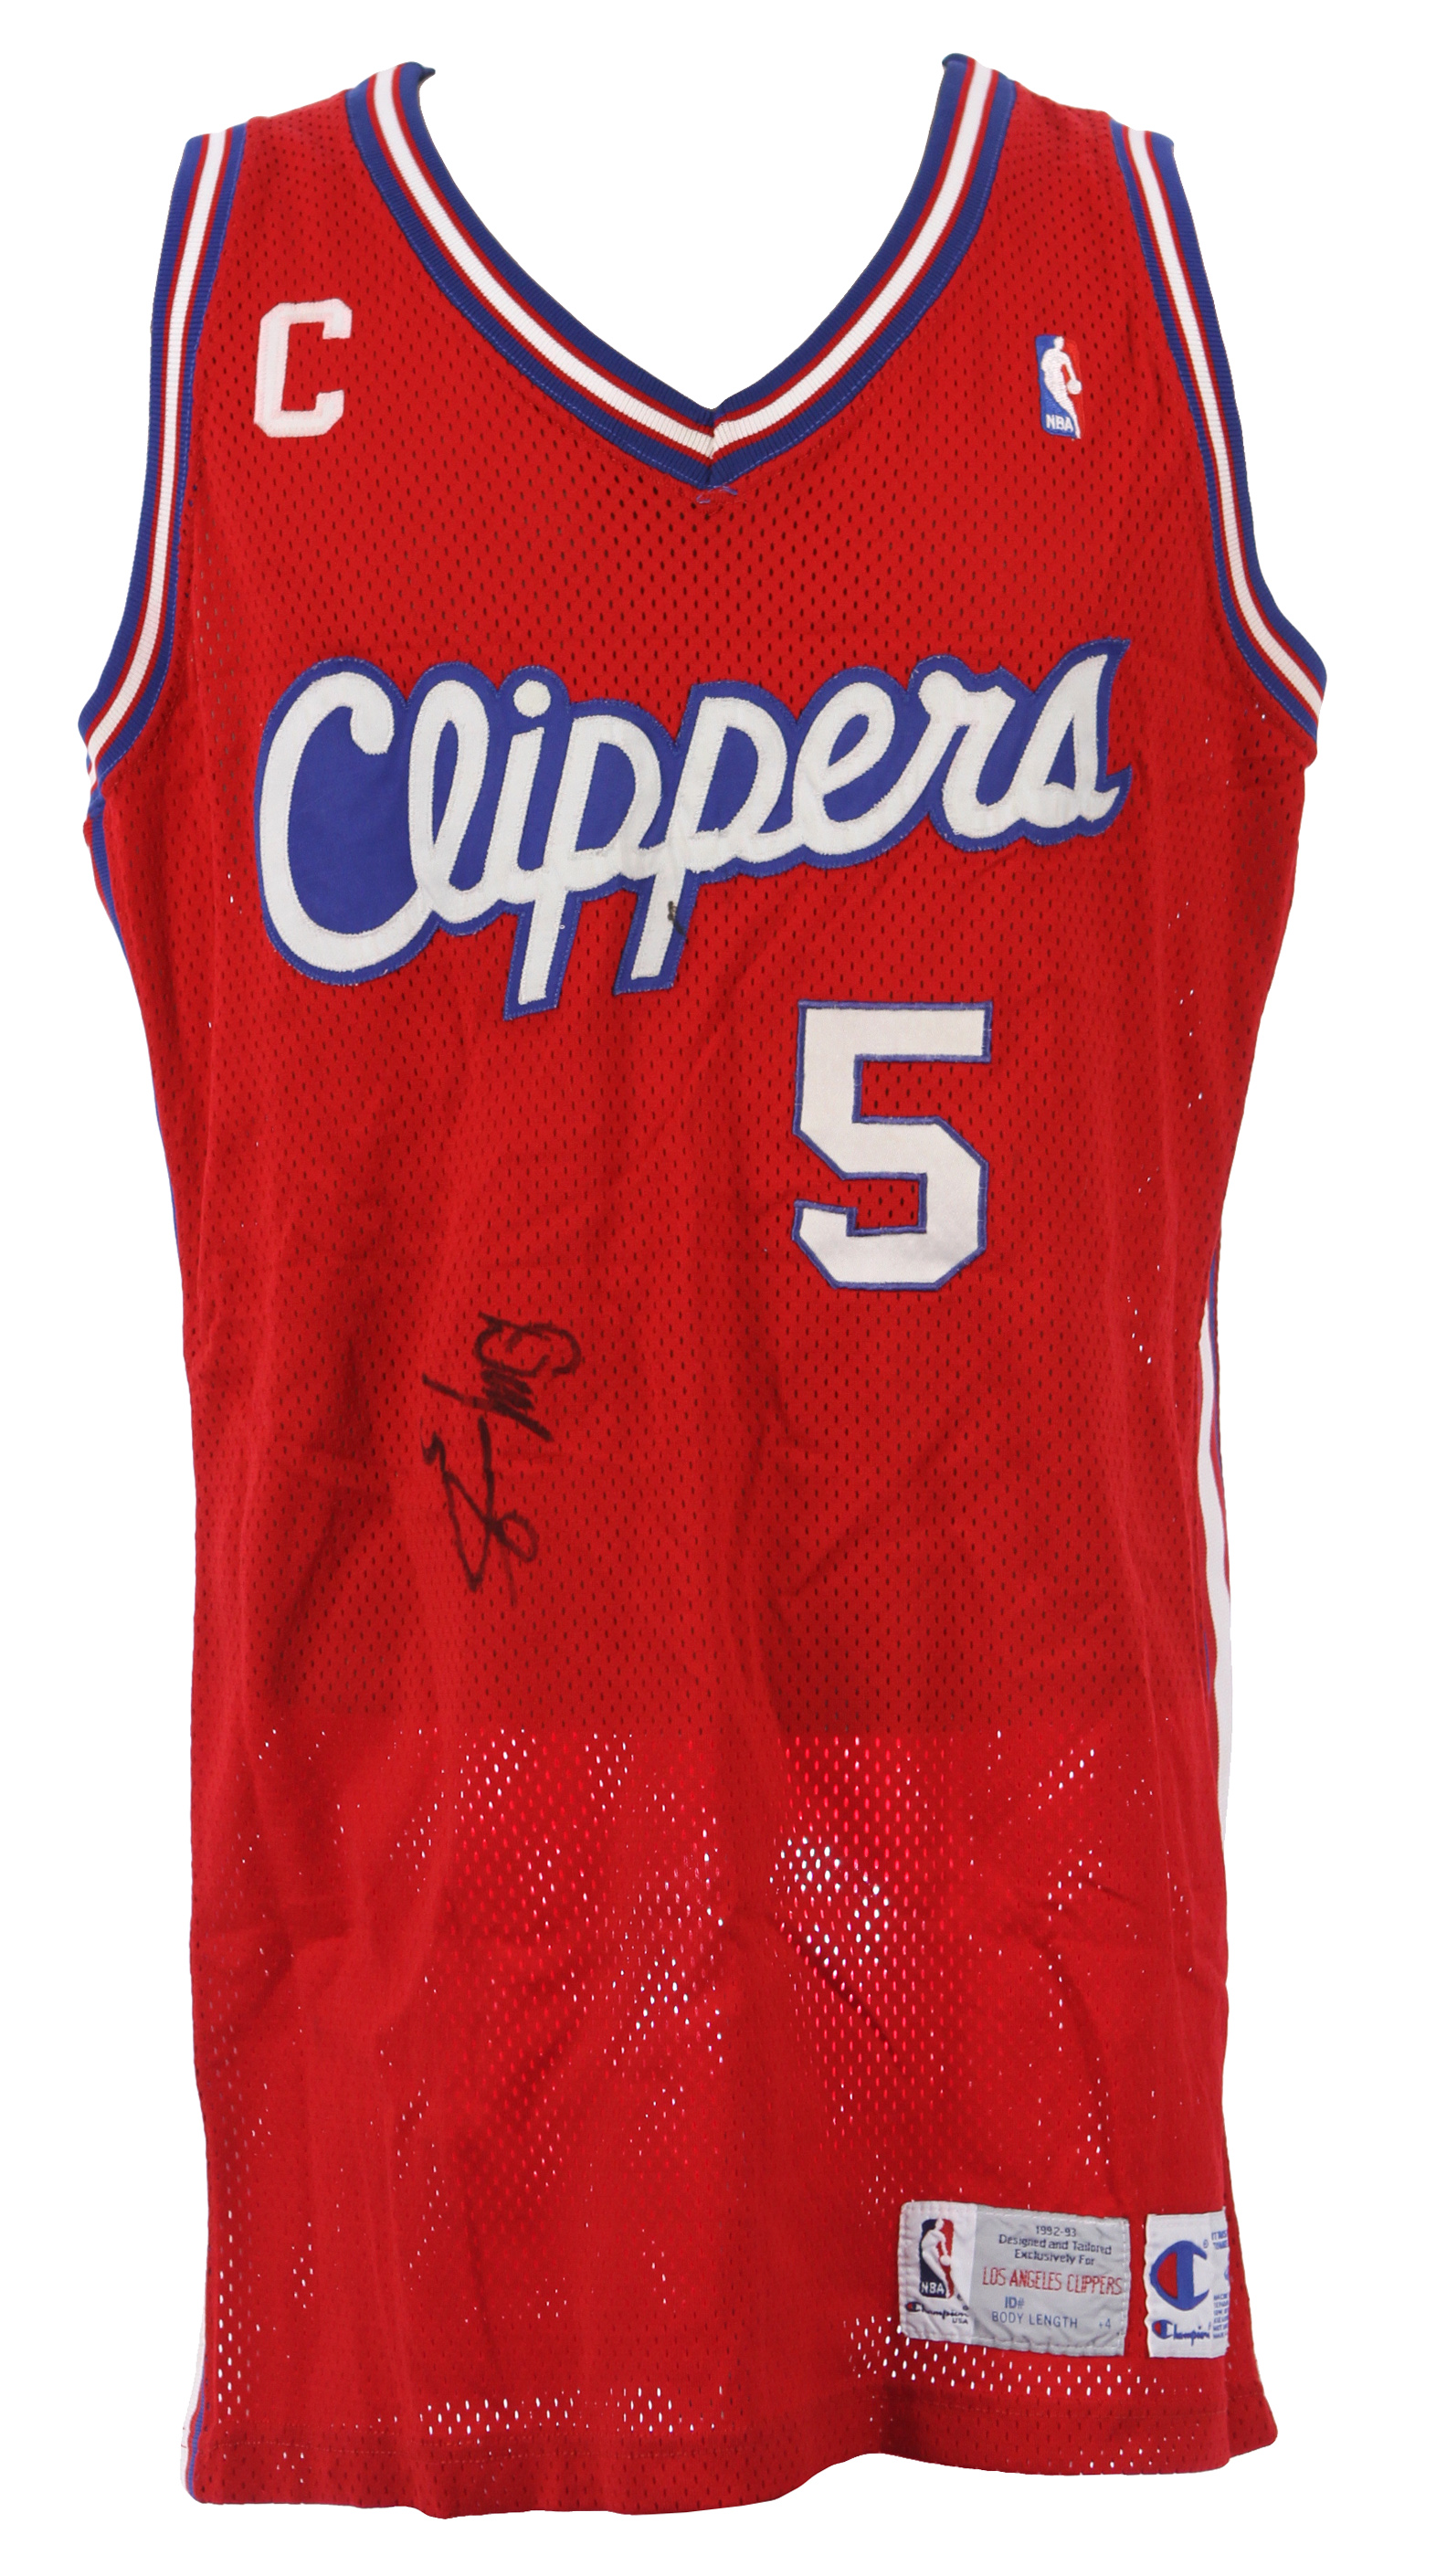 danny manning clippers jersey